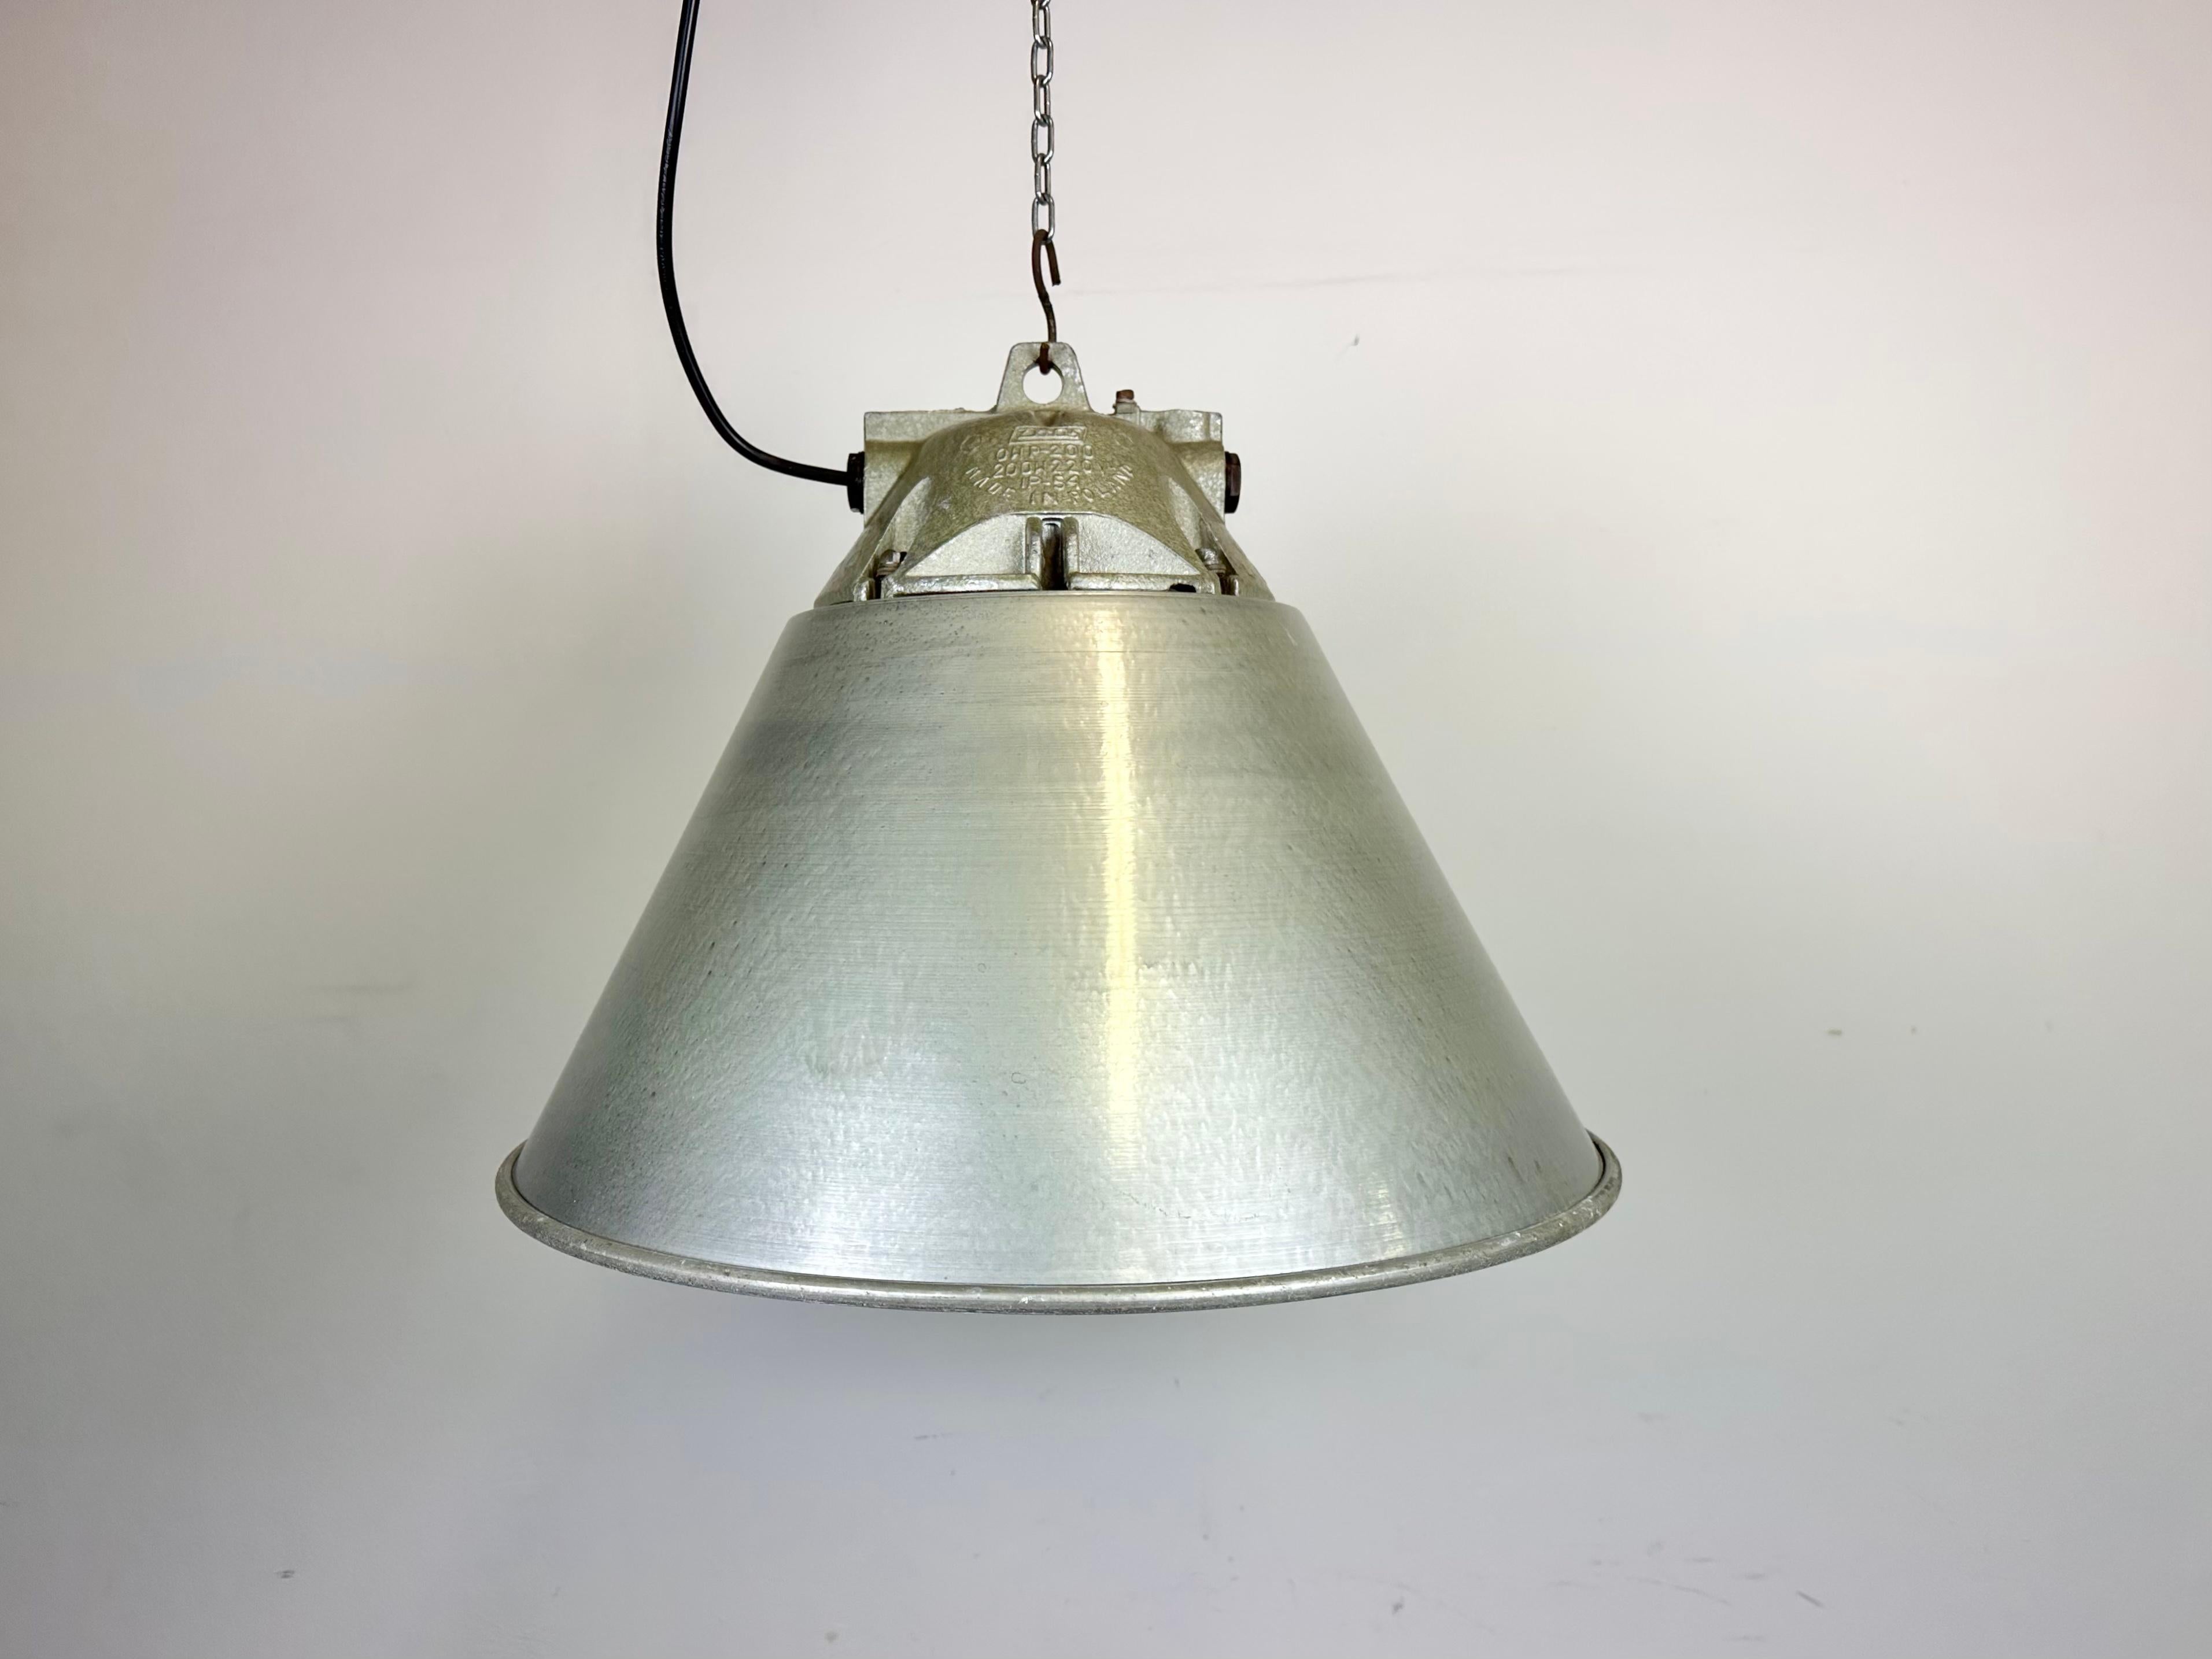 Industrial factory pendant light manufactured by Zaos in Poland during the 1970s. It features a cast aluminium body, an explosion-proof glass and grey hammerpaint aluminium shade with white interior.
The socket requires E27/ E26 lightbulbs. New